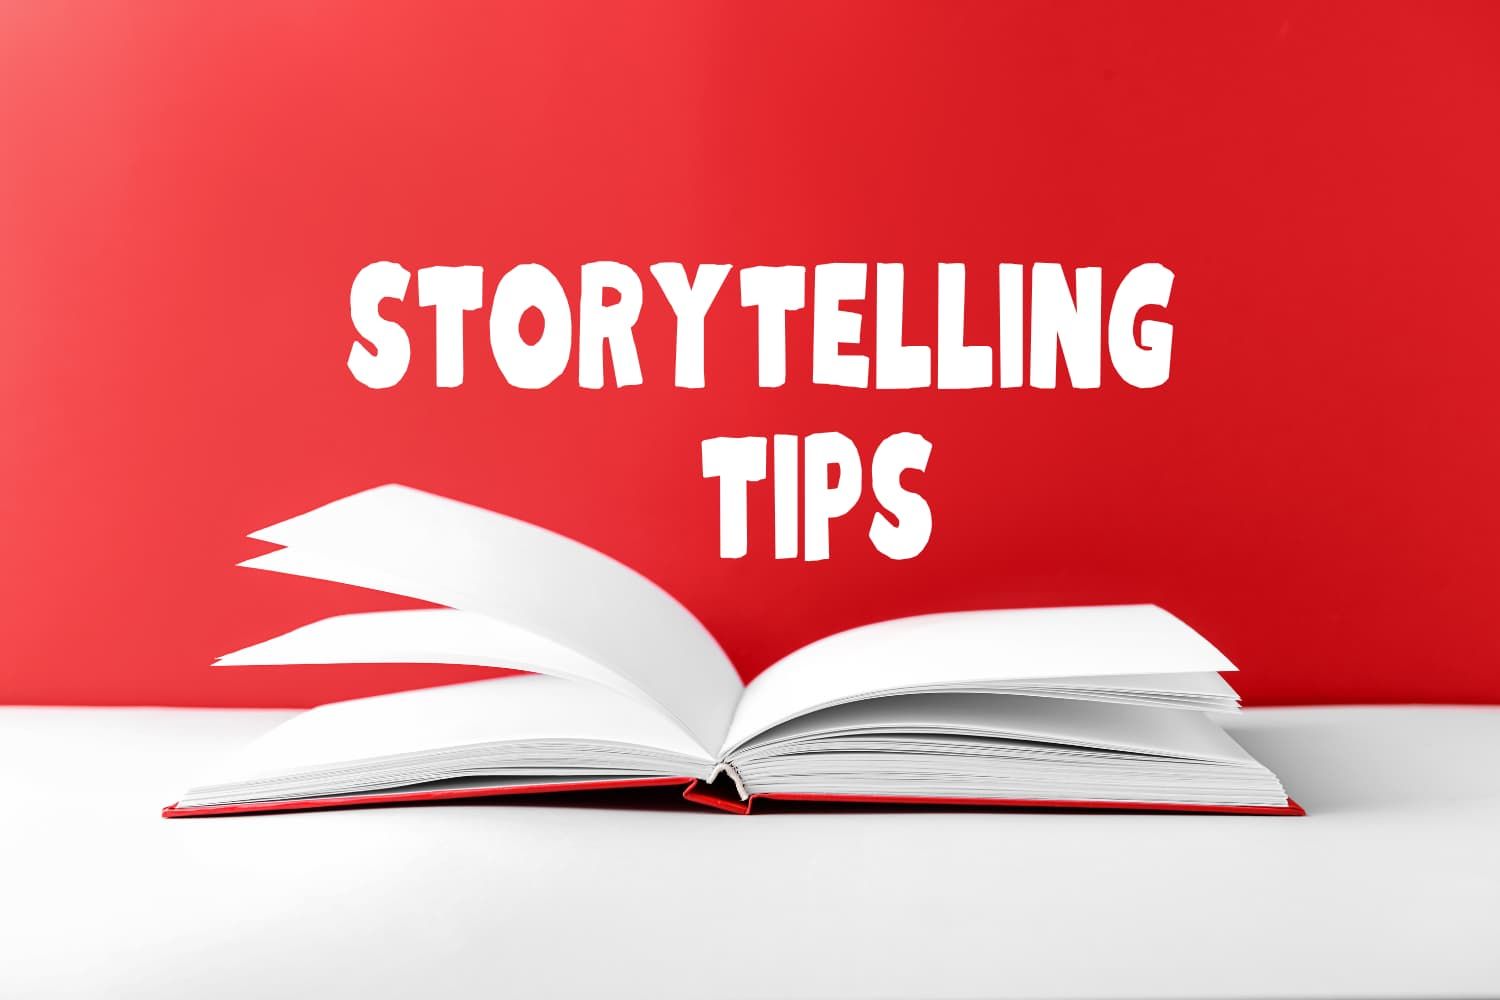 Storytelling%20tips%20-%20NT%20The%20pharisee%20and%20the%20tax%20collector%20-%20Teaching%20the%20parable%20of%20the%20tax%20collector%20and%20pharisee-bb2ec4e5 Temple